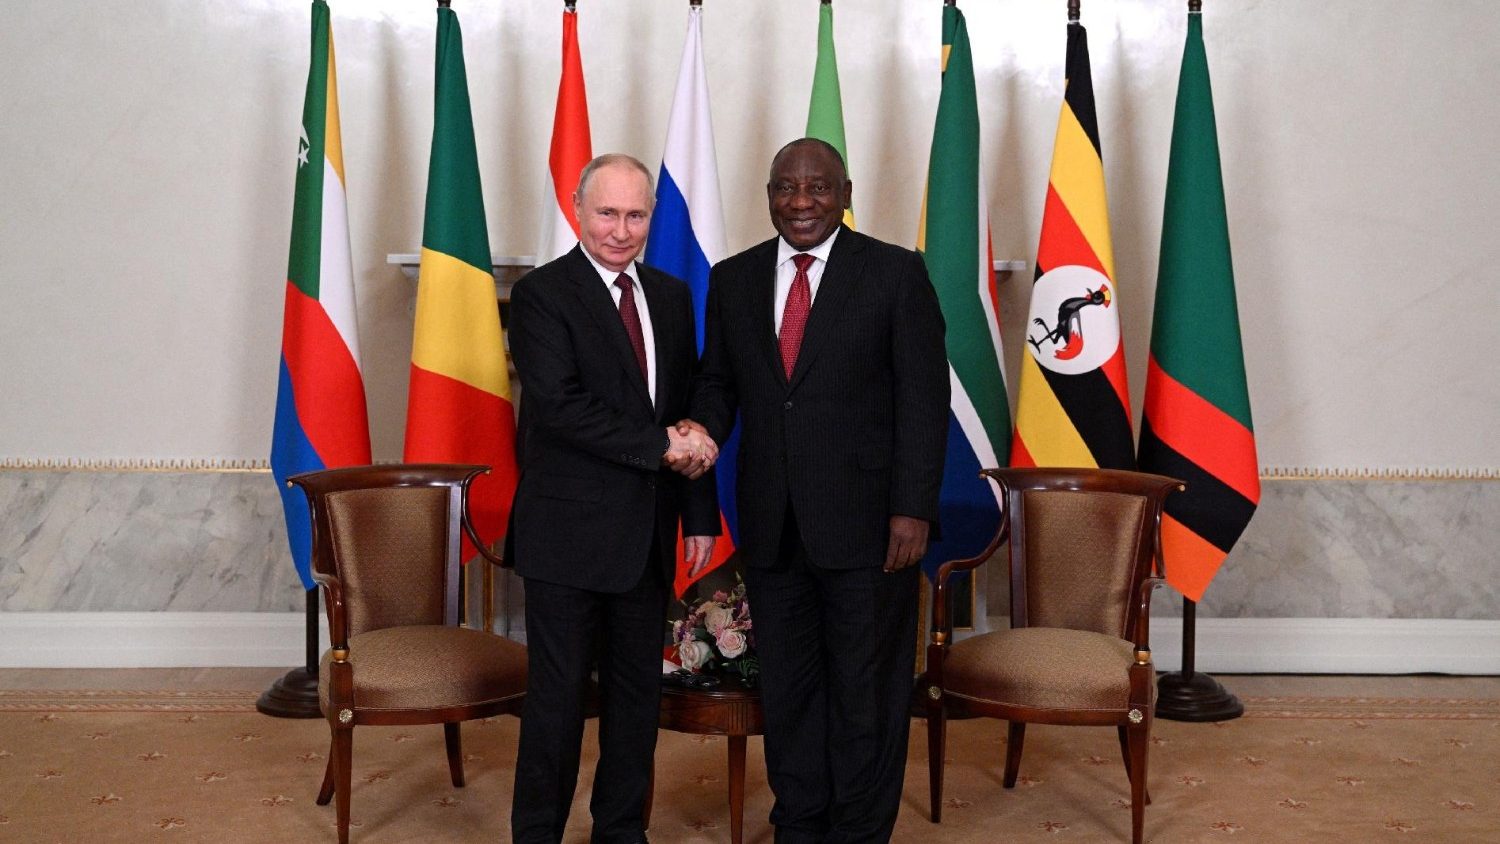 Ramaphosa Urges End to Ukraine War: See How This South African President Plans to Promote Peace 14